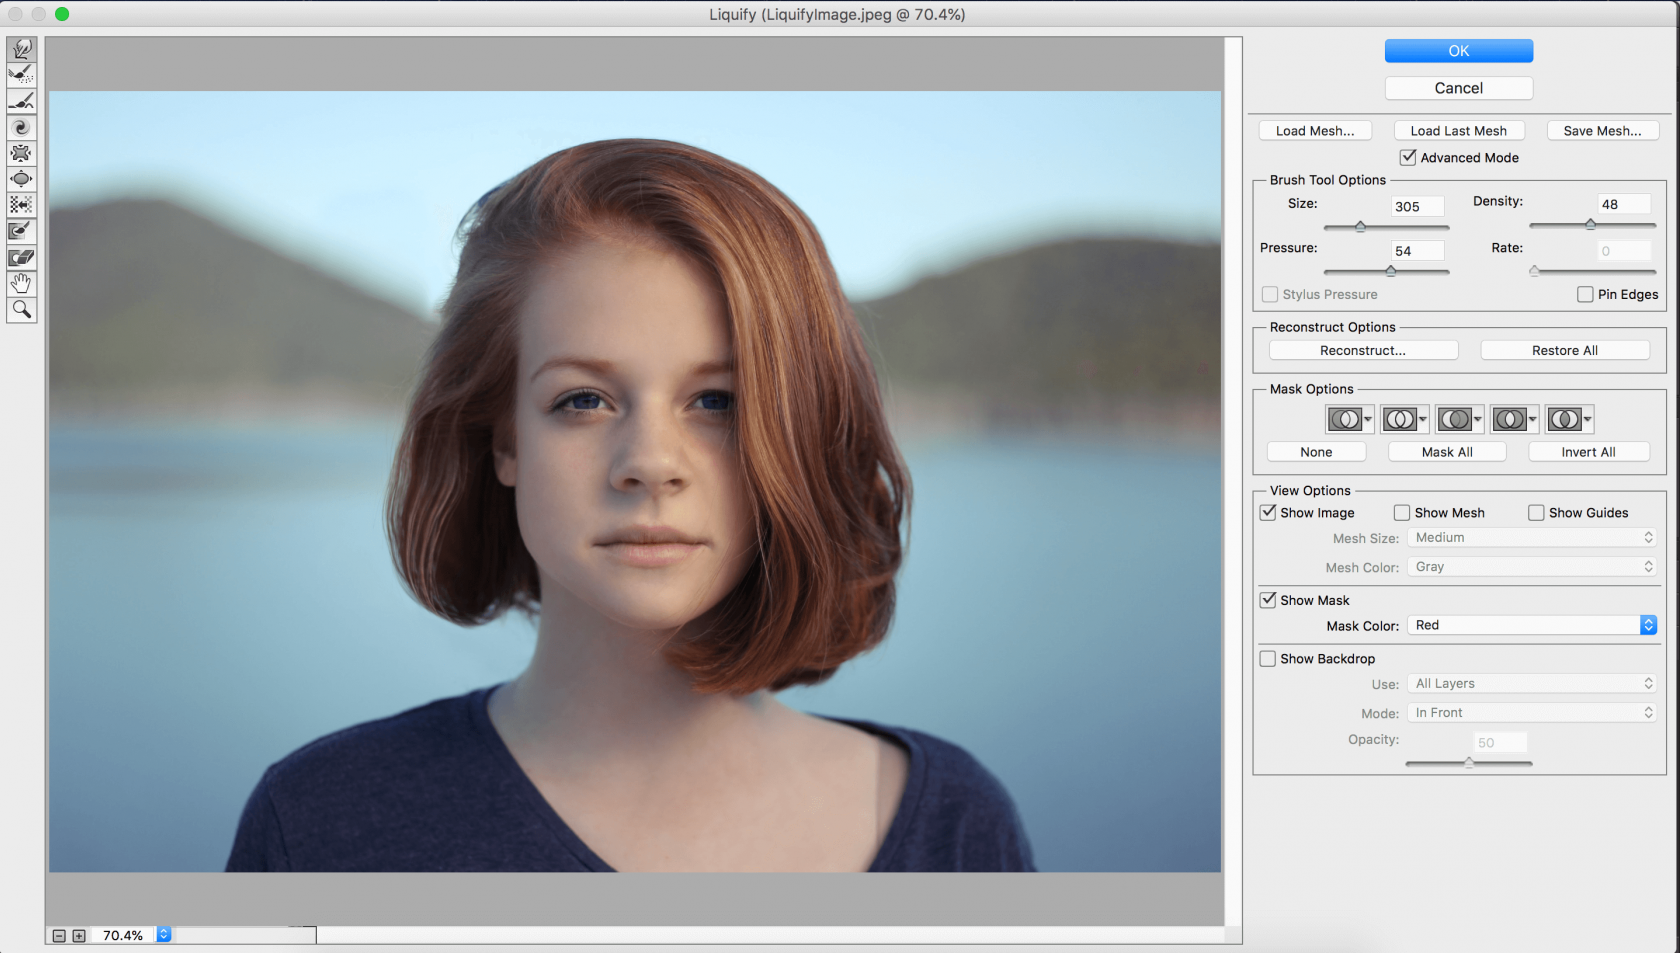 How to Use the Liquify Tool in Photoshop Image8